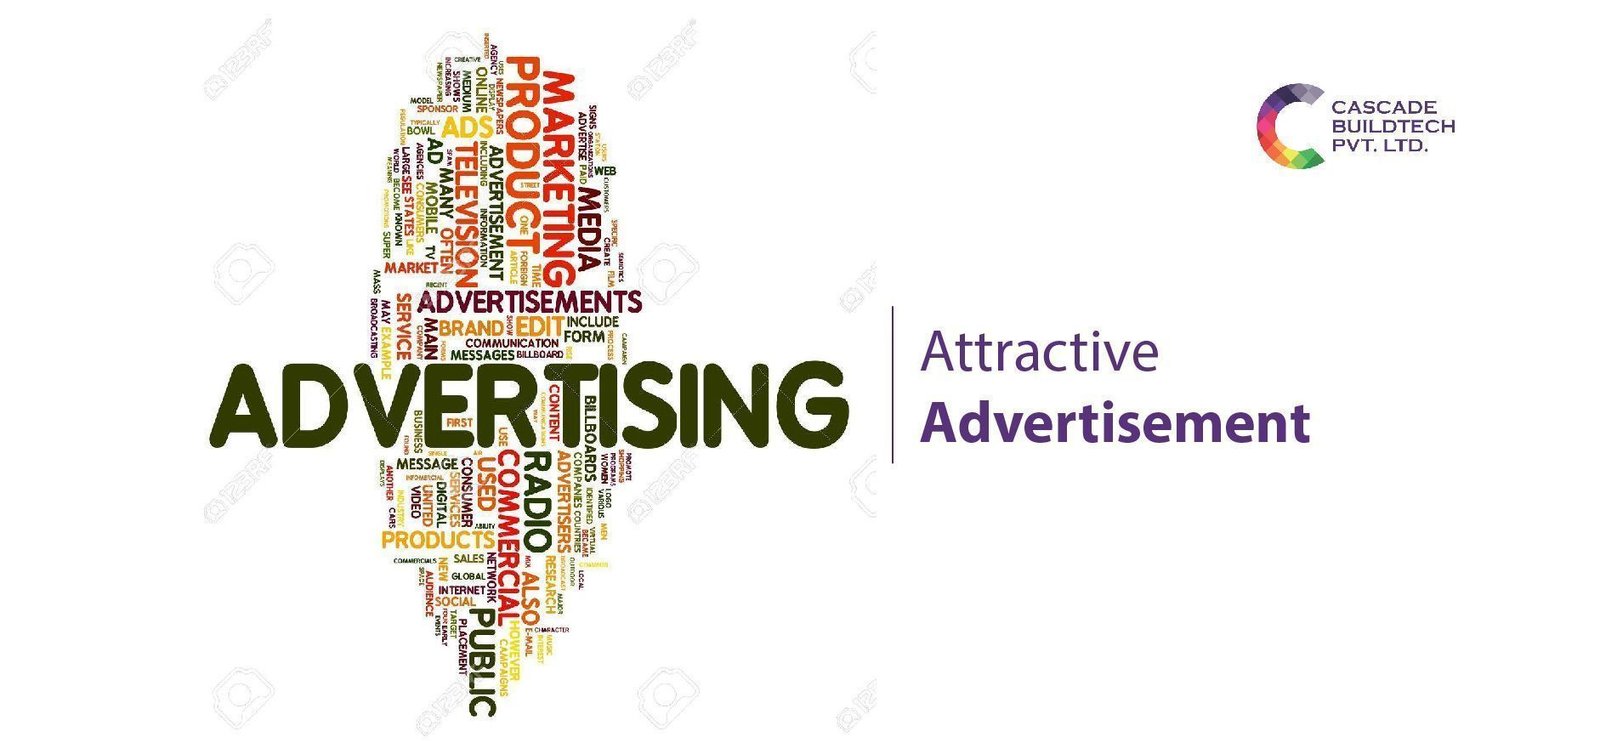 Attractive-advertisement-to sell-your-property-fast-in-mohali